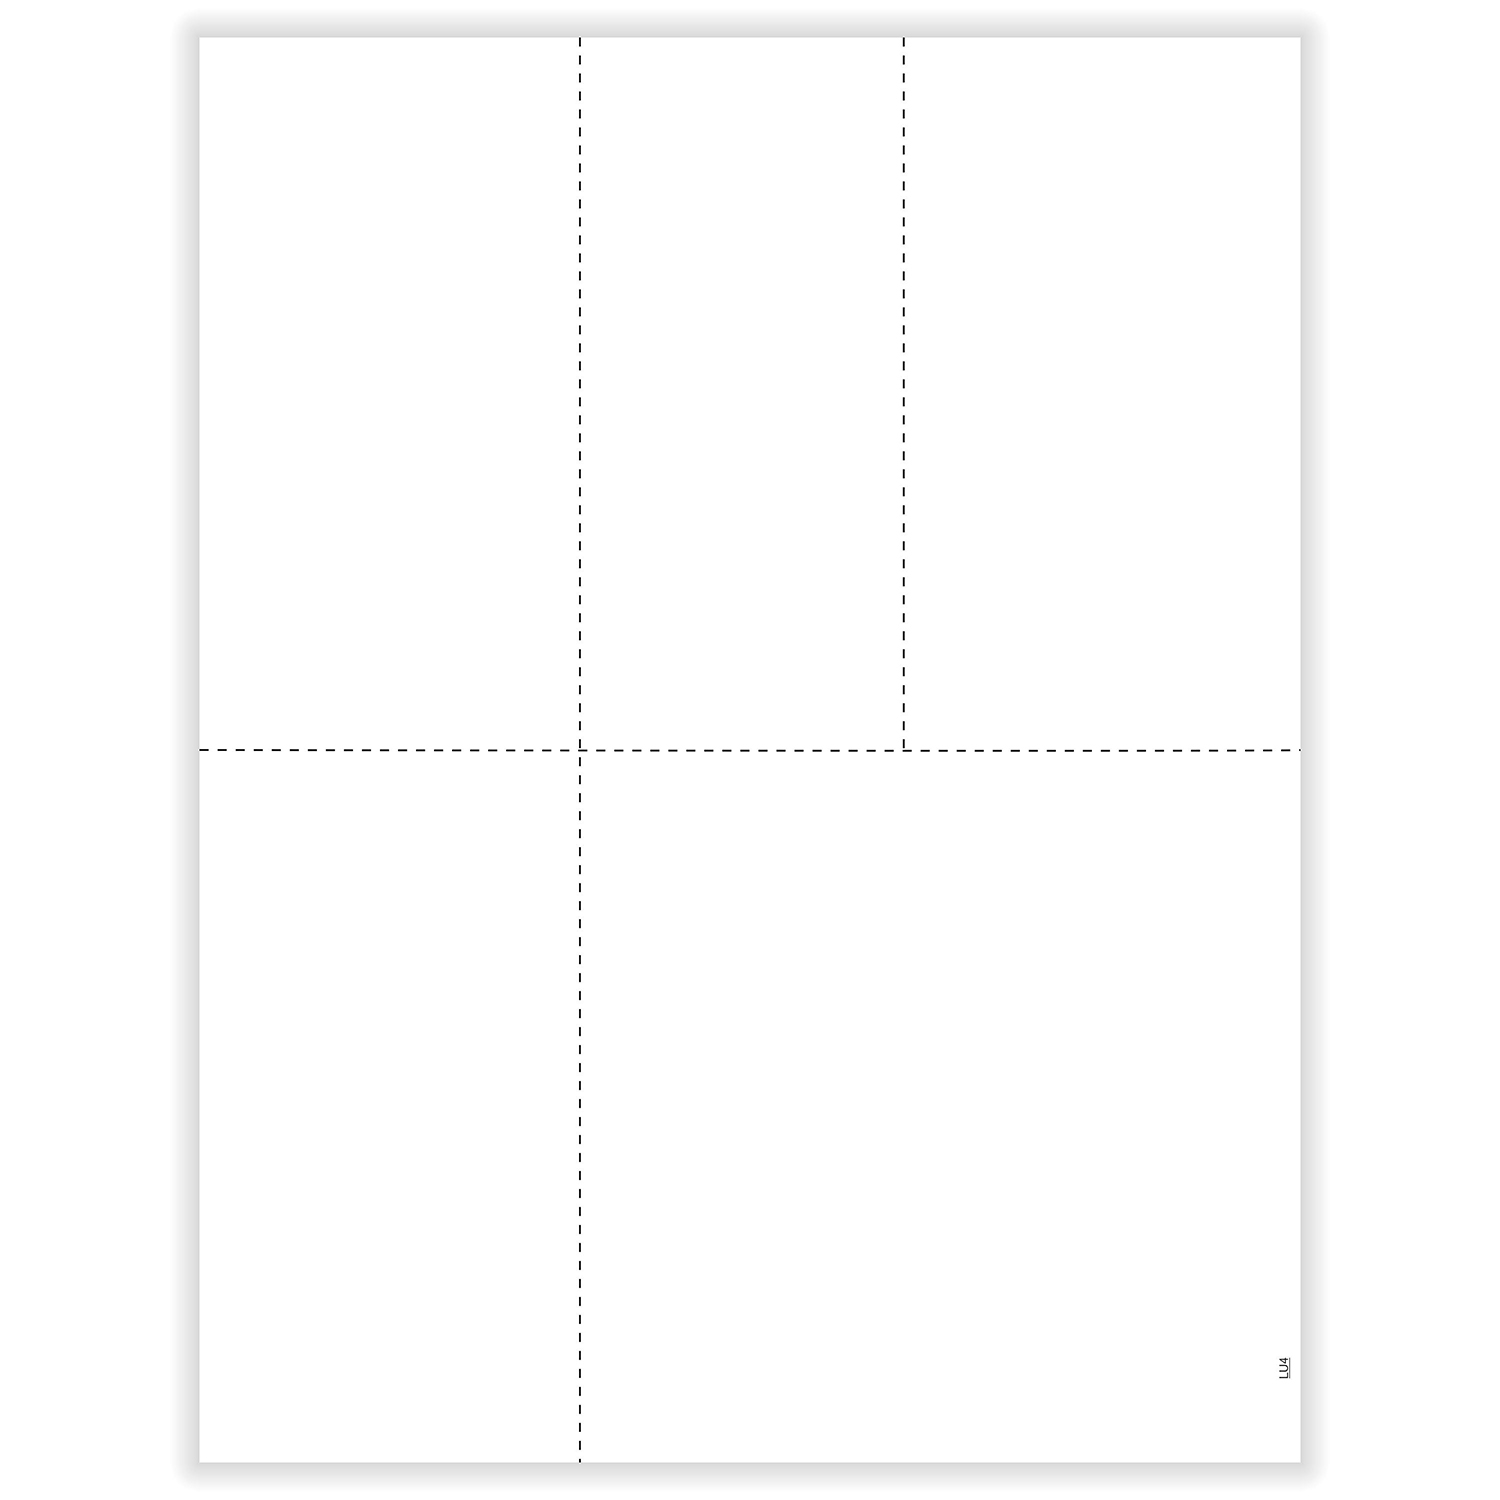 Picture of W-2/1099 Universal Blank, 4-Up (500 Sheets)